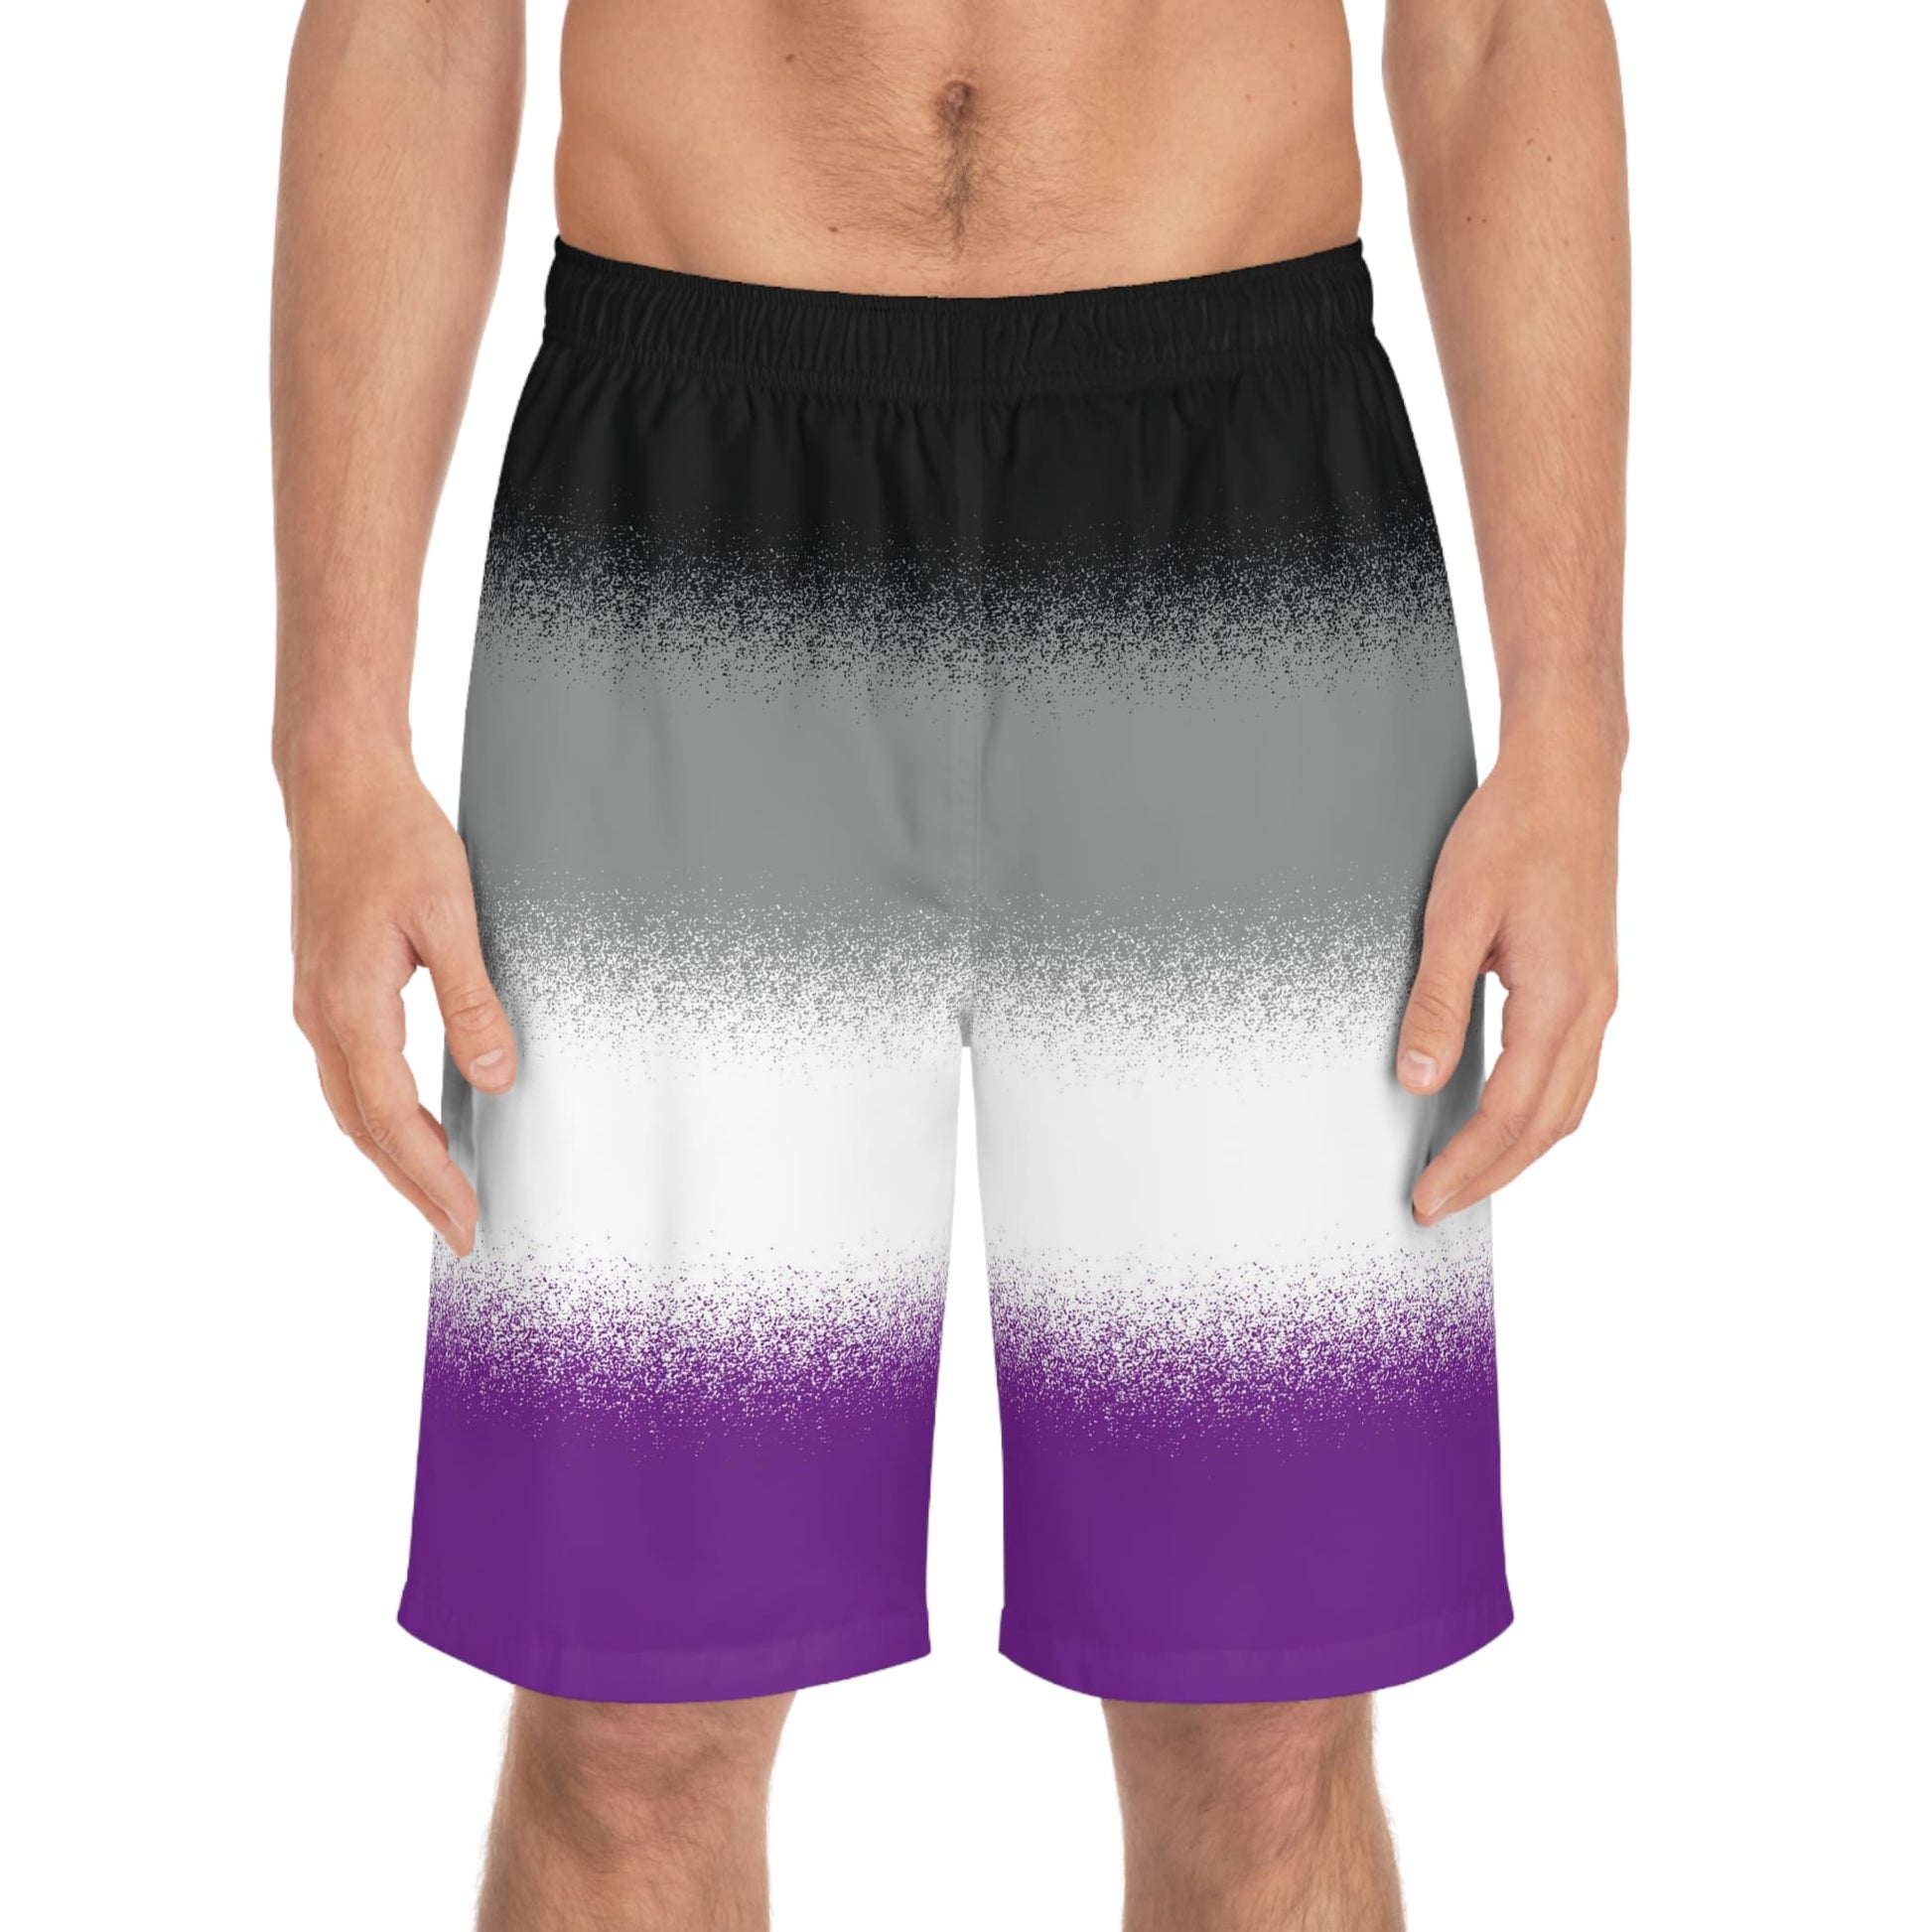 asexual swim shorts, front